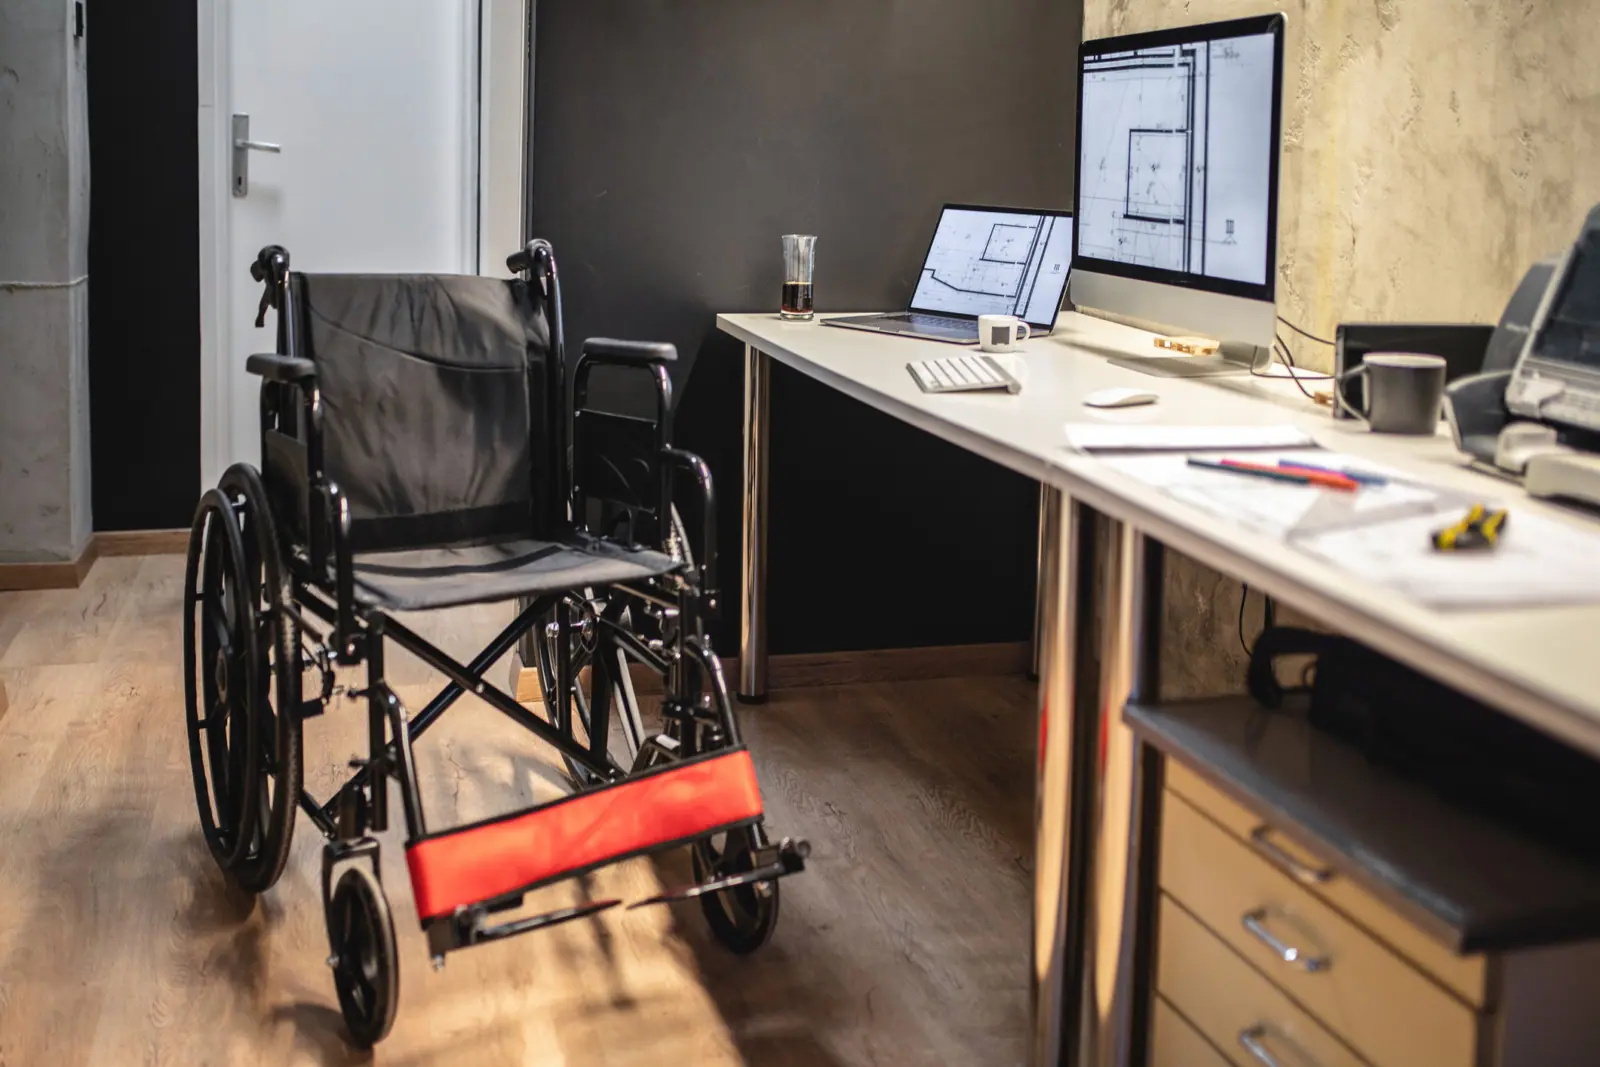 5 Ways to Make Your Workplace More Accessible